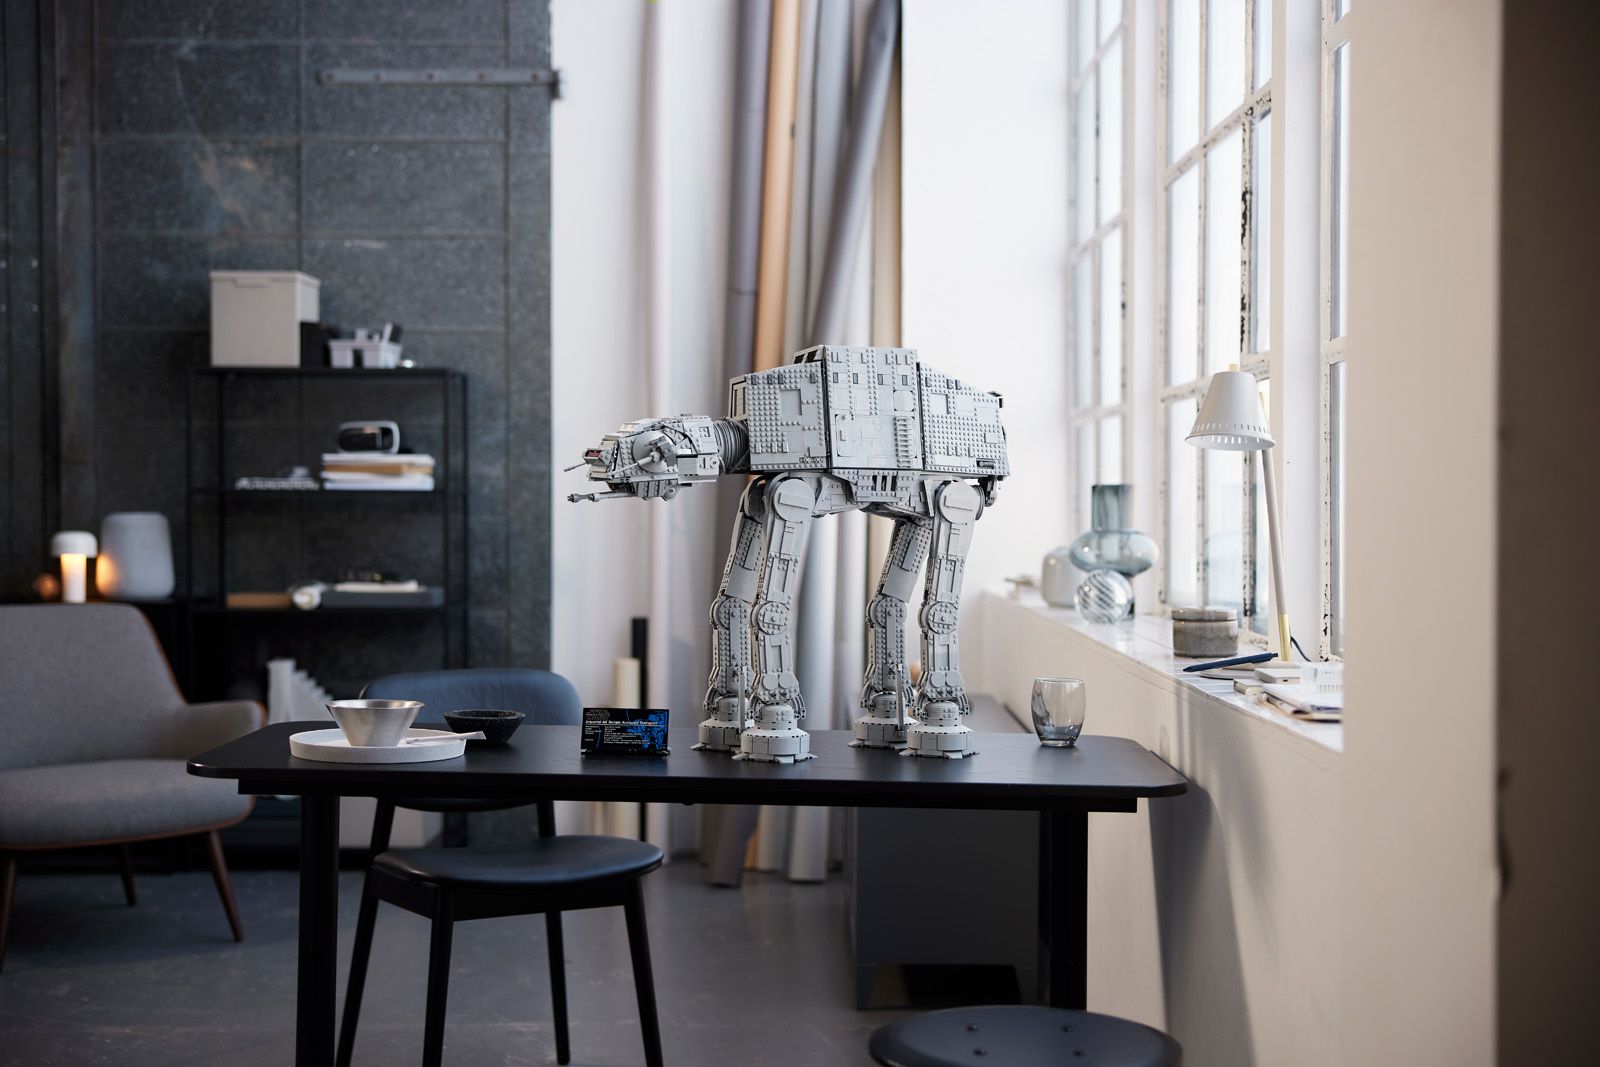 Lego Star Wars AT-AT Ultimate Collector Series set is a whopping £750 photo 2